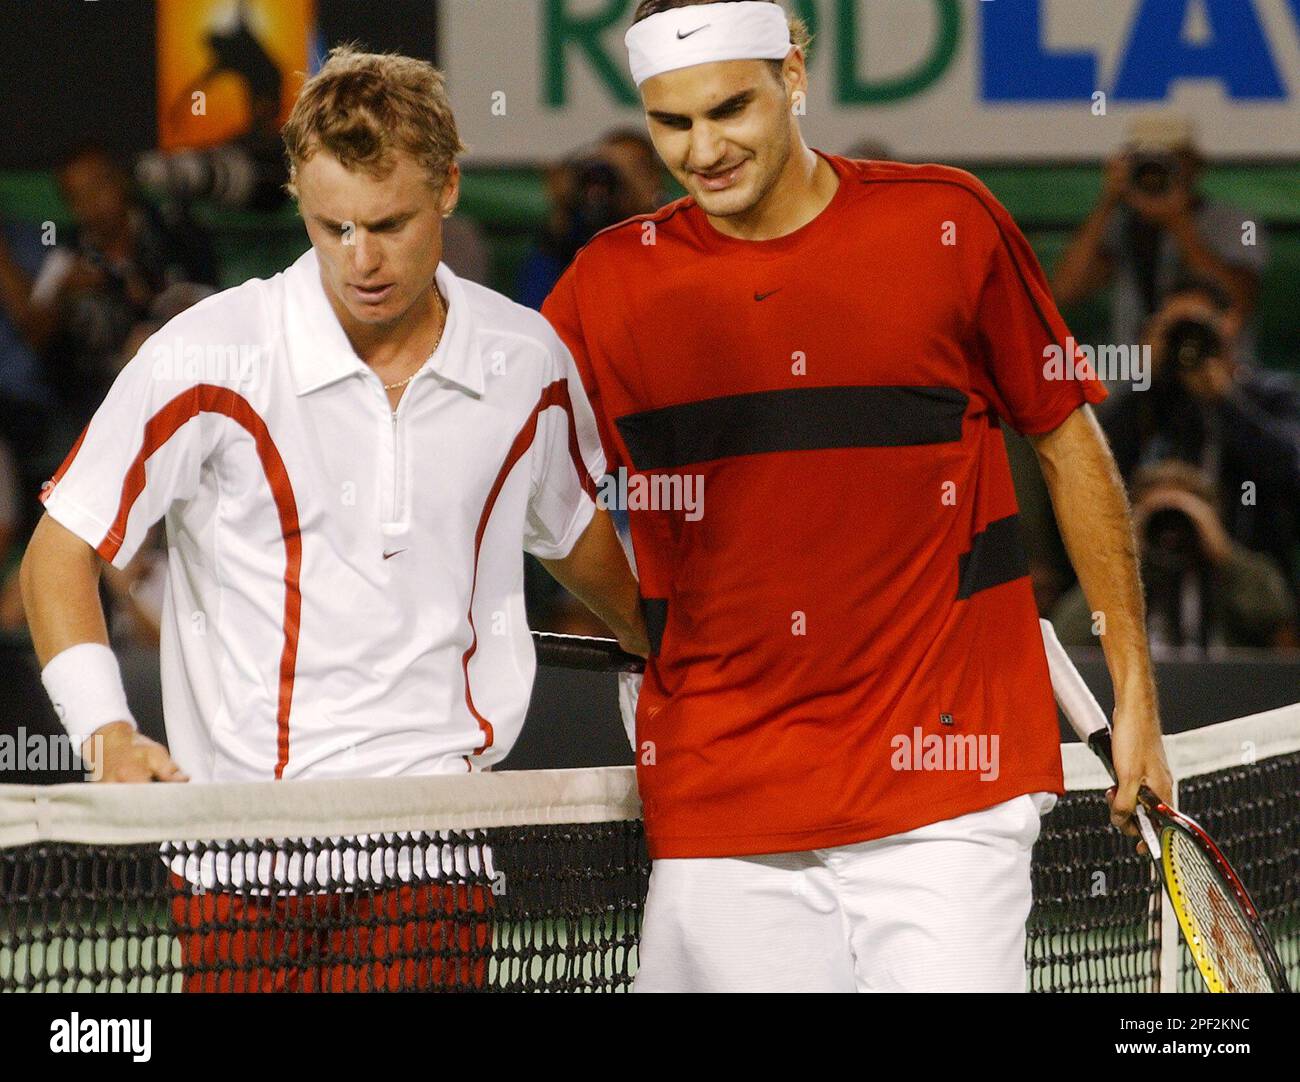 Switzerland's Roger Federer, right, is congratulated by Australia's Lleyton  Hewitt after their fourth round match at the Australian Open in Melbourne,  Australia, Monday, Jan. 26, 2004. Federer won in four sets 4-6